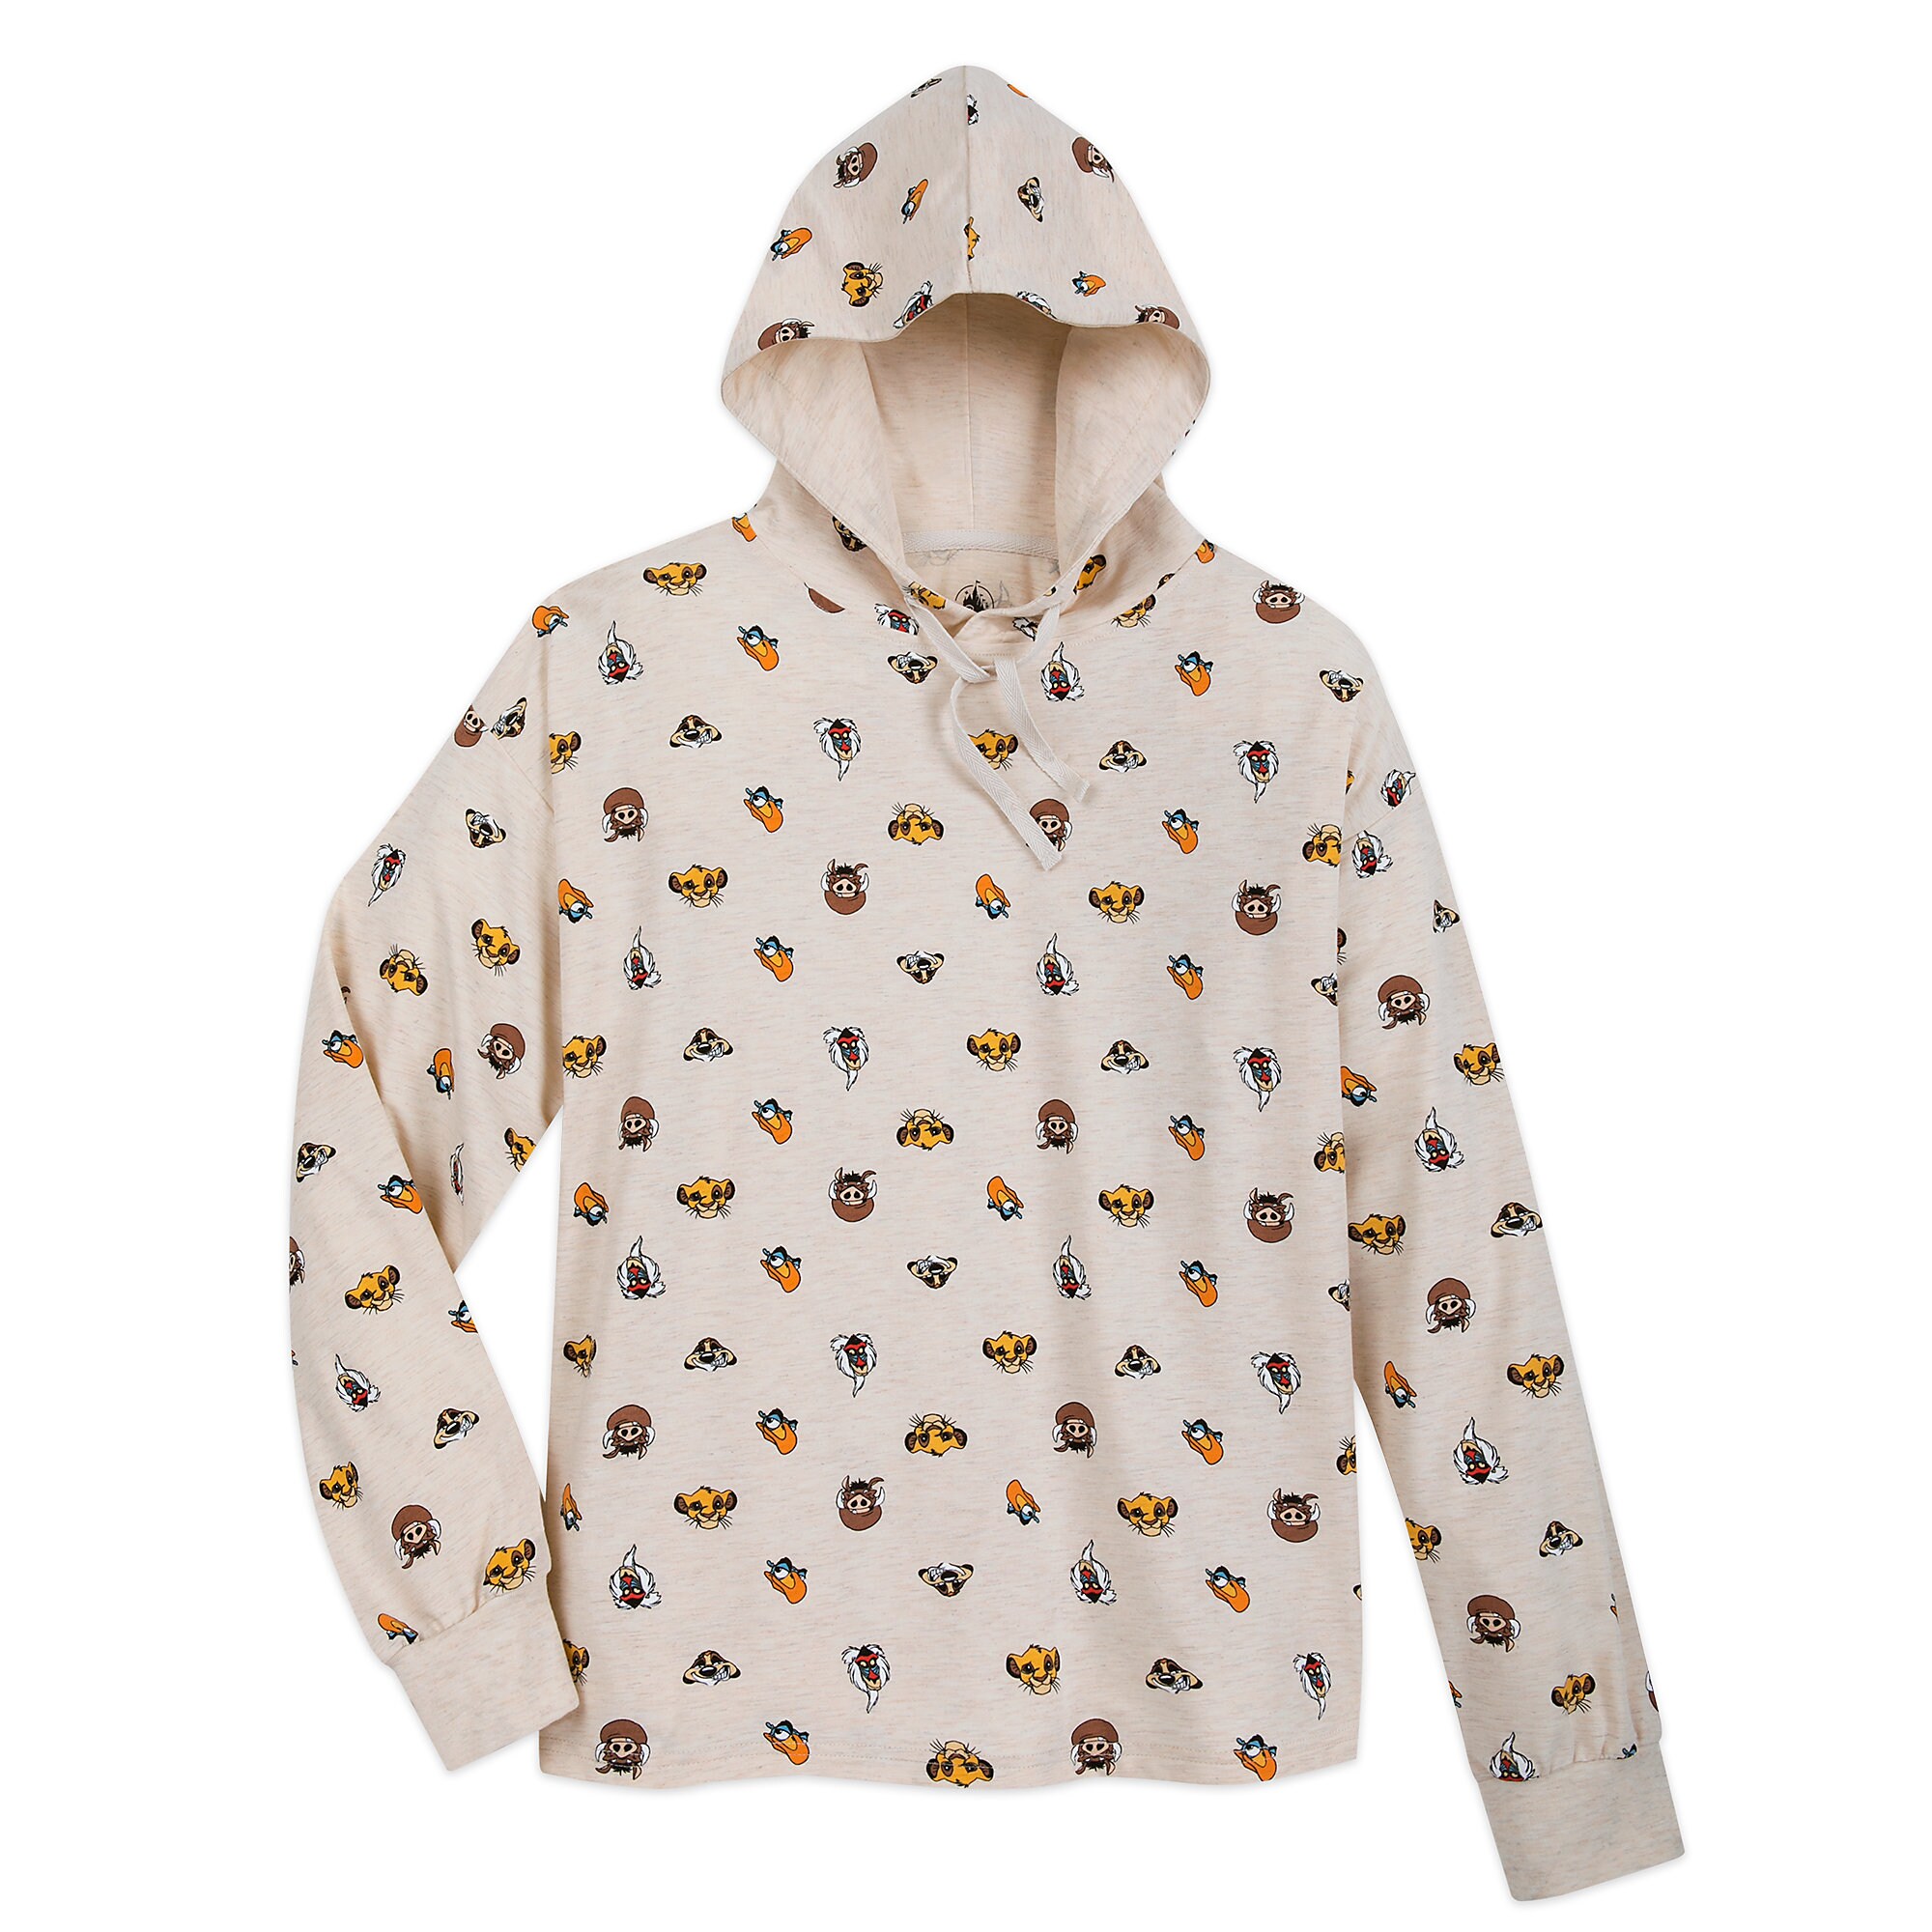 The Lion King Hooded Sleep Top for Women